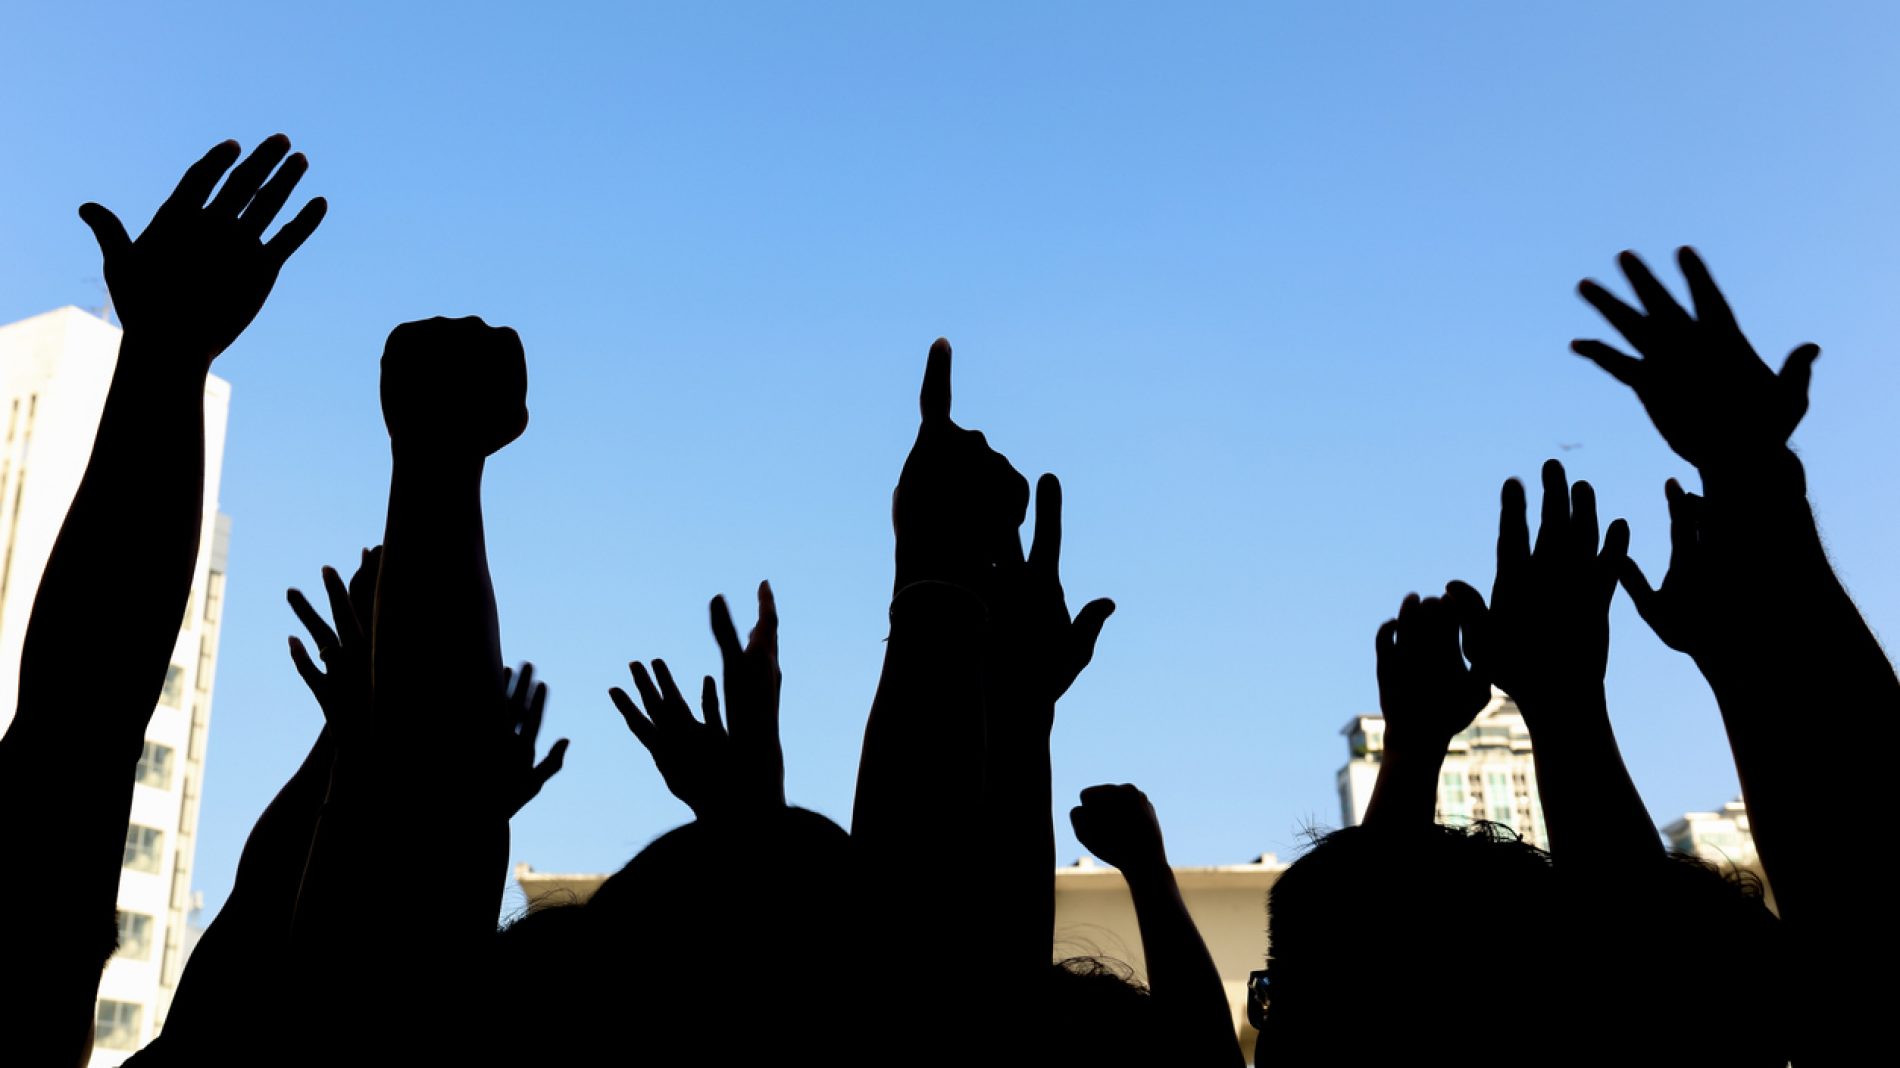 community initiative or concert concept, hands of group of people in the sky, silhouette